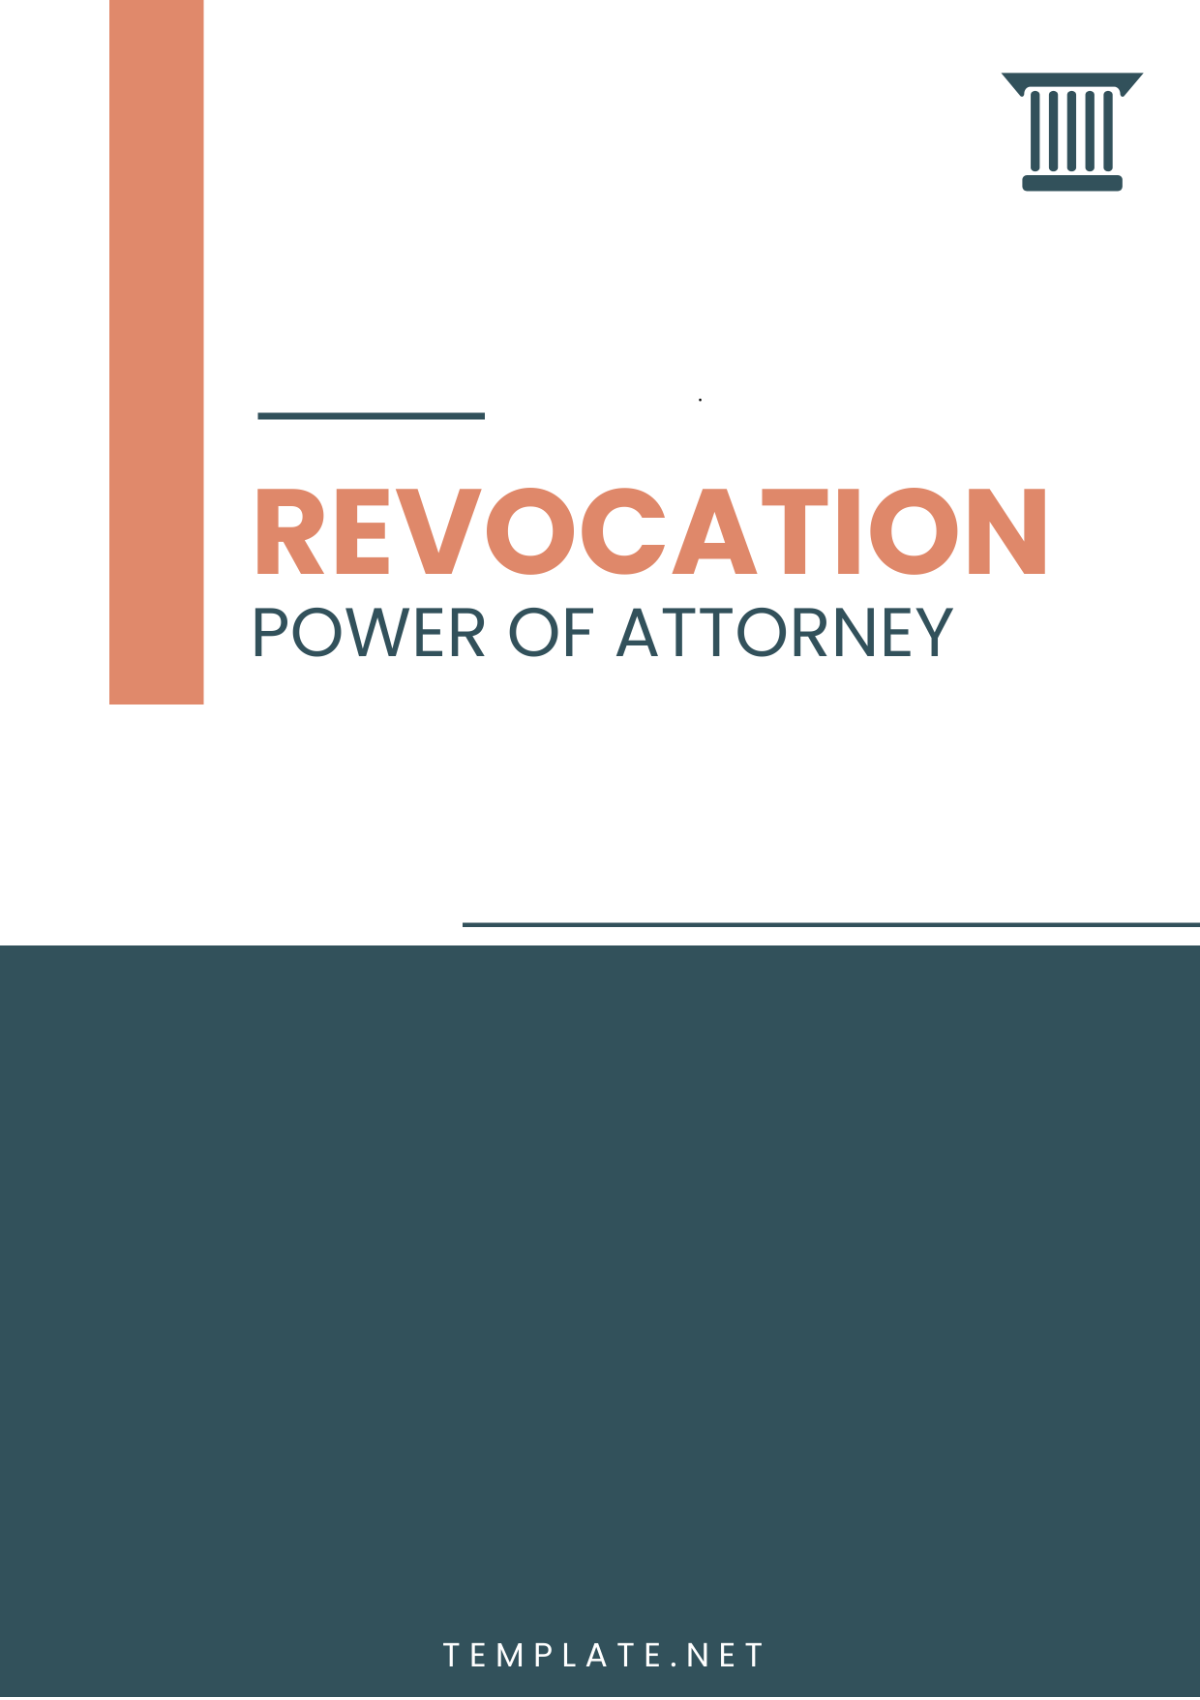 Revocation Power of Attorney Template